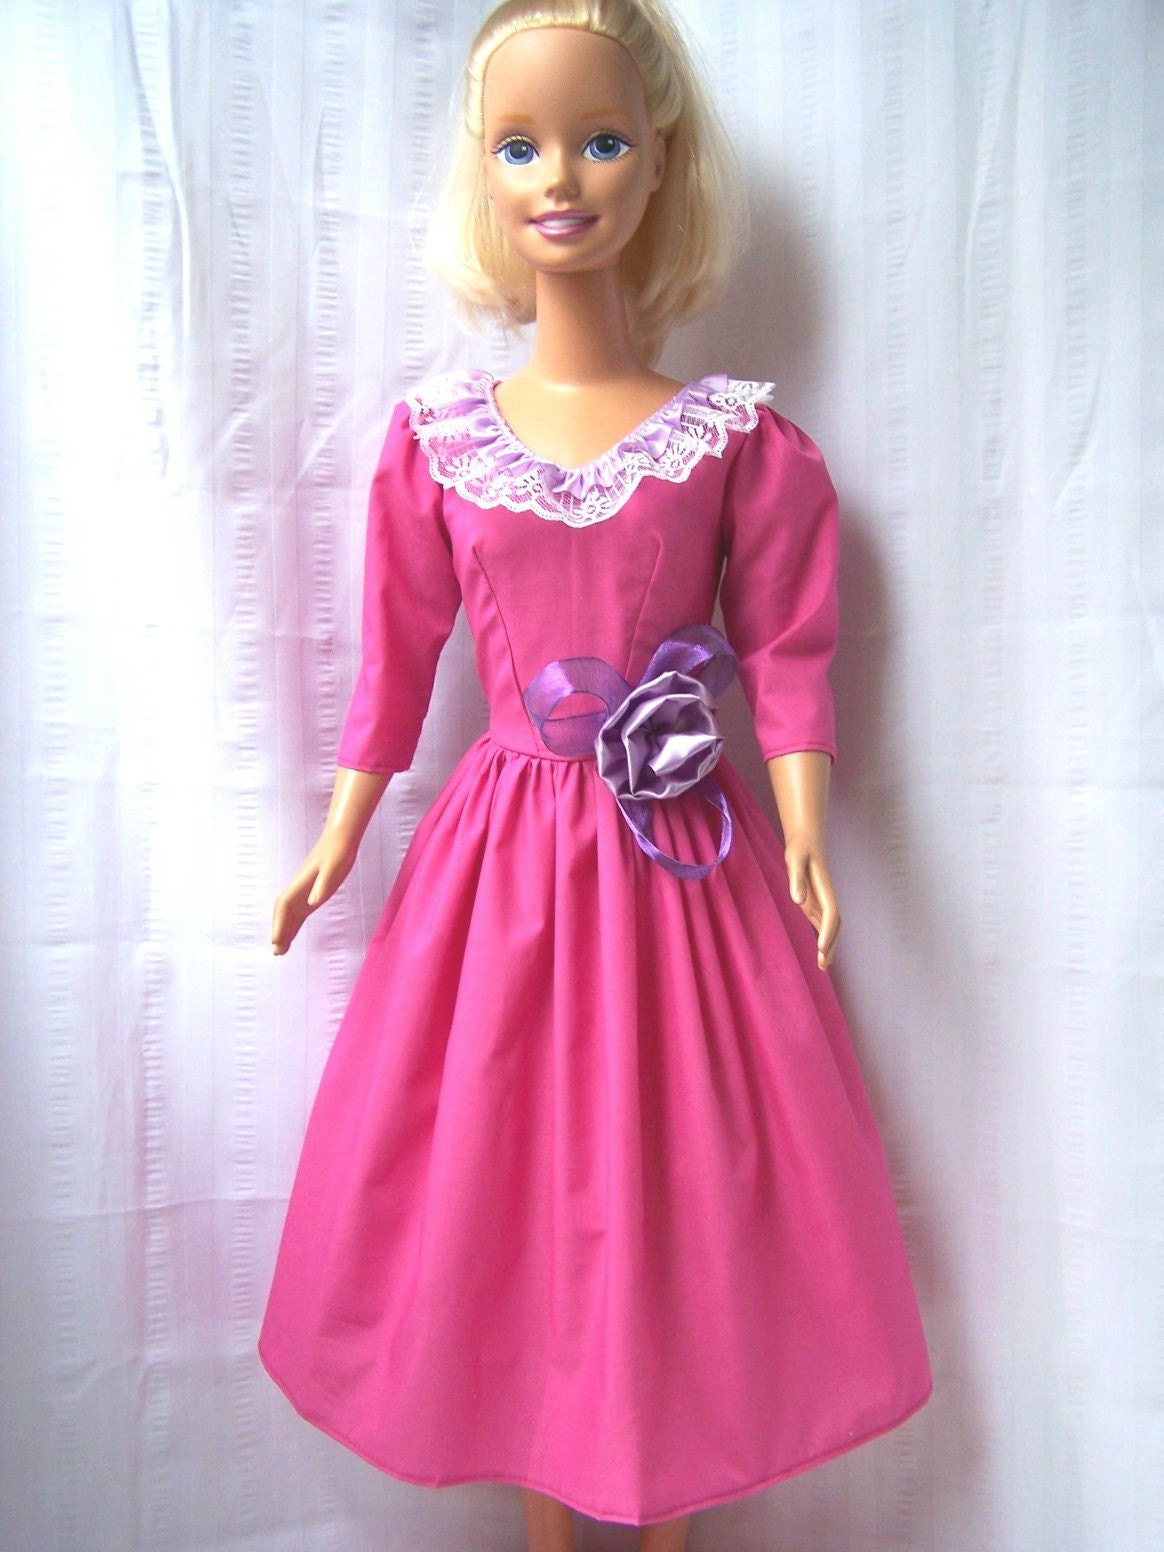 Barbie Doll Dress My Size Barbie Tall Pink By Lazo On Etsy